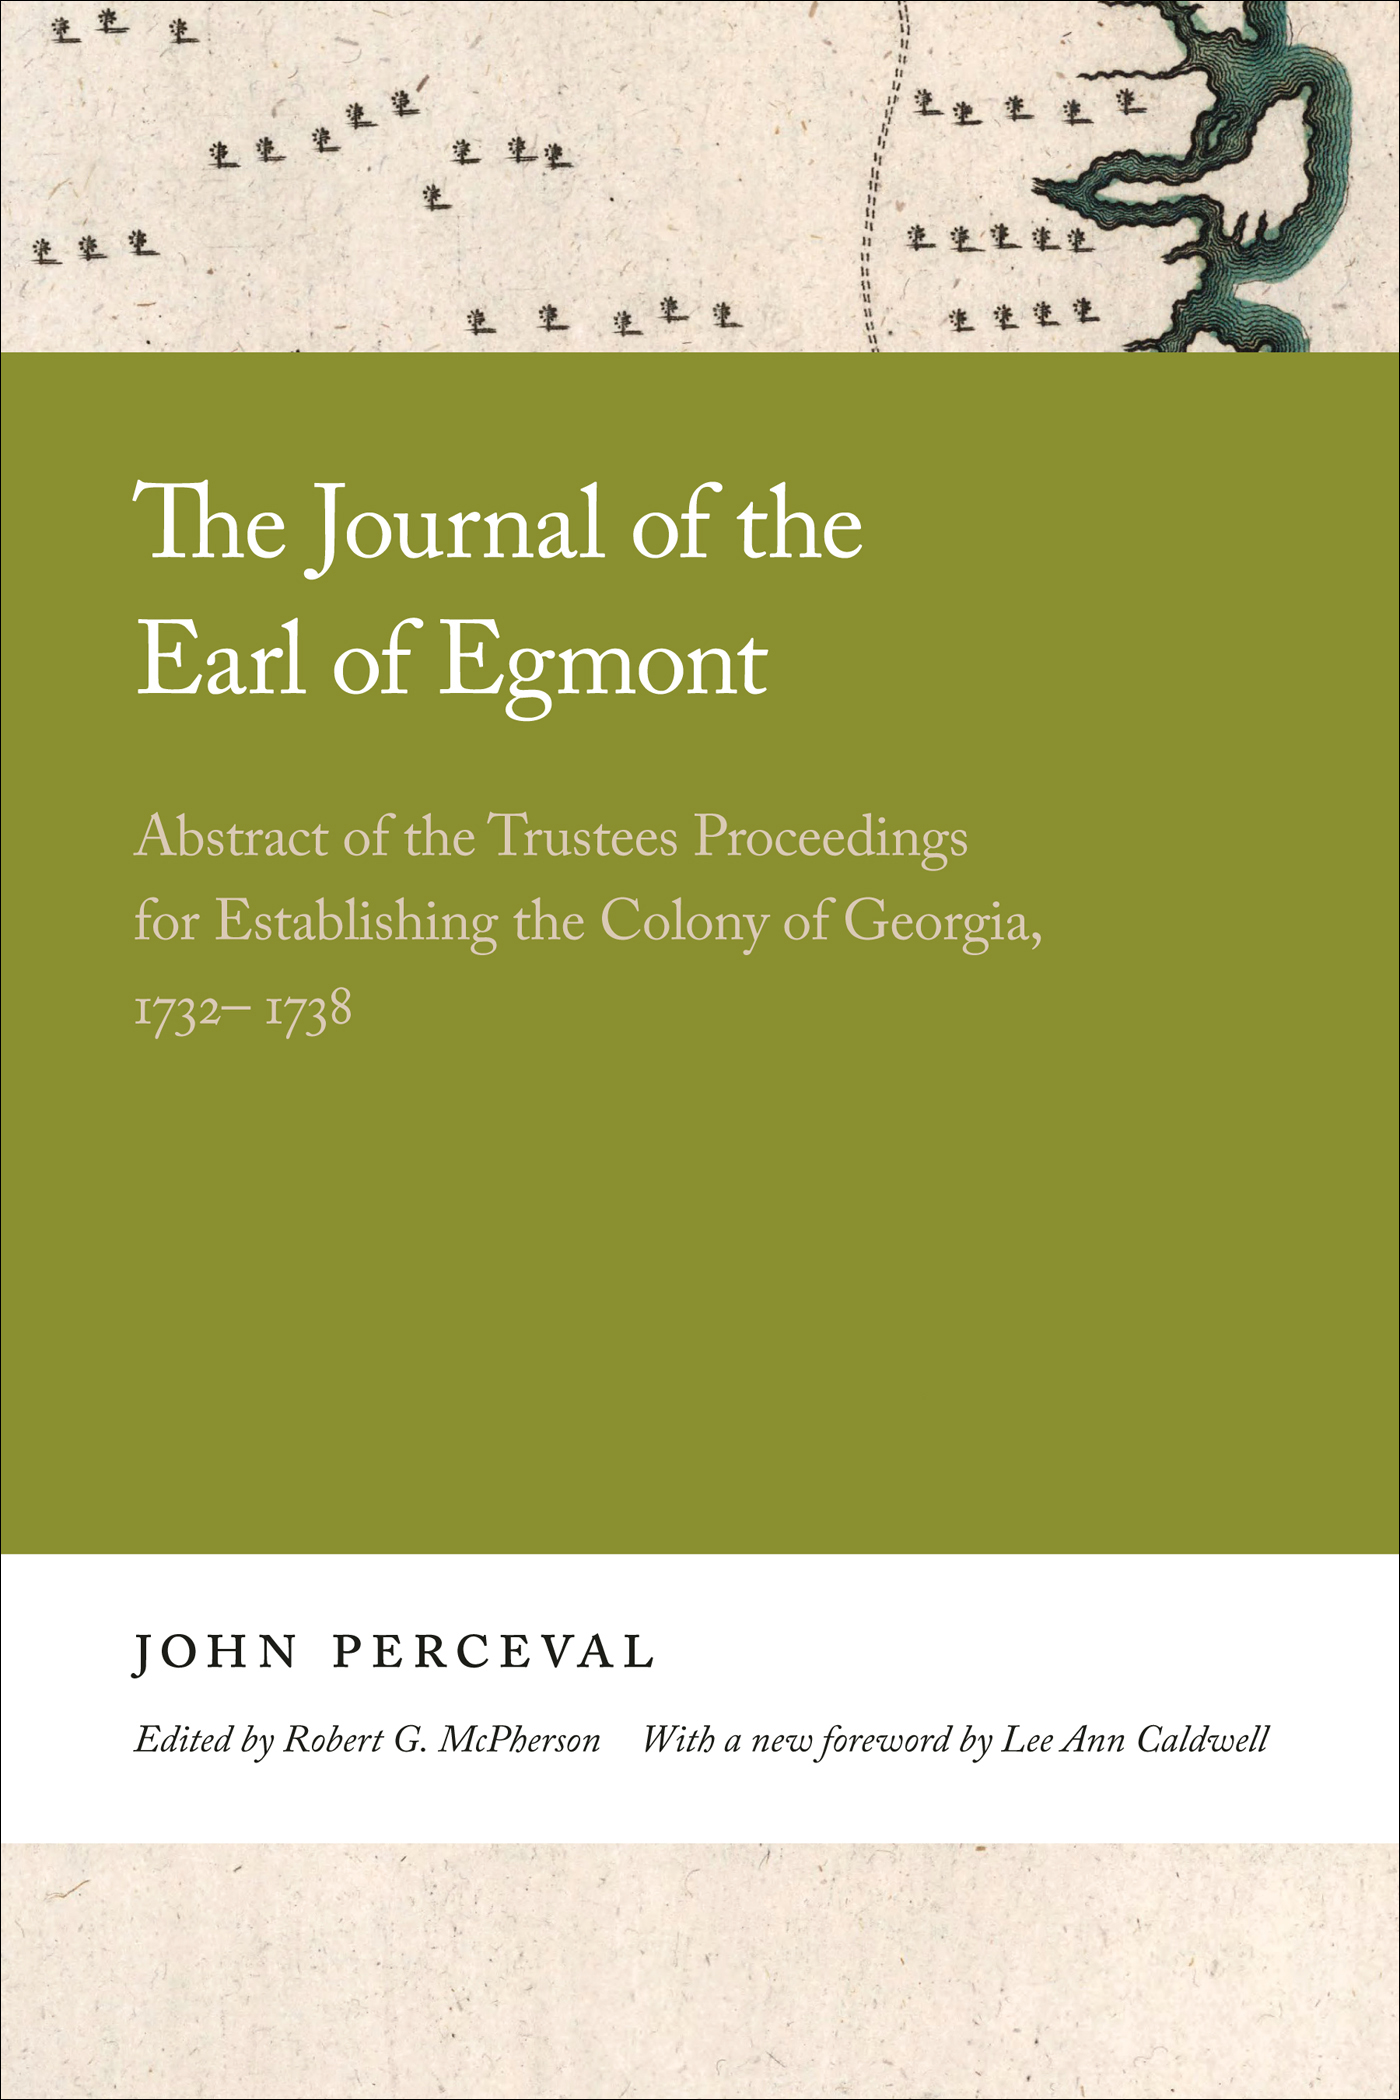 Cover of, The journal of the Earl of Egmont, abstract of the trustees proceedings for establishing the colony of Georgia, 1732 to 1738.